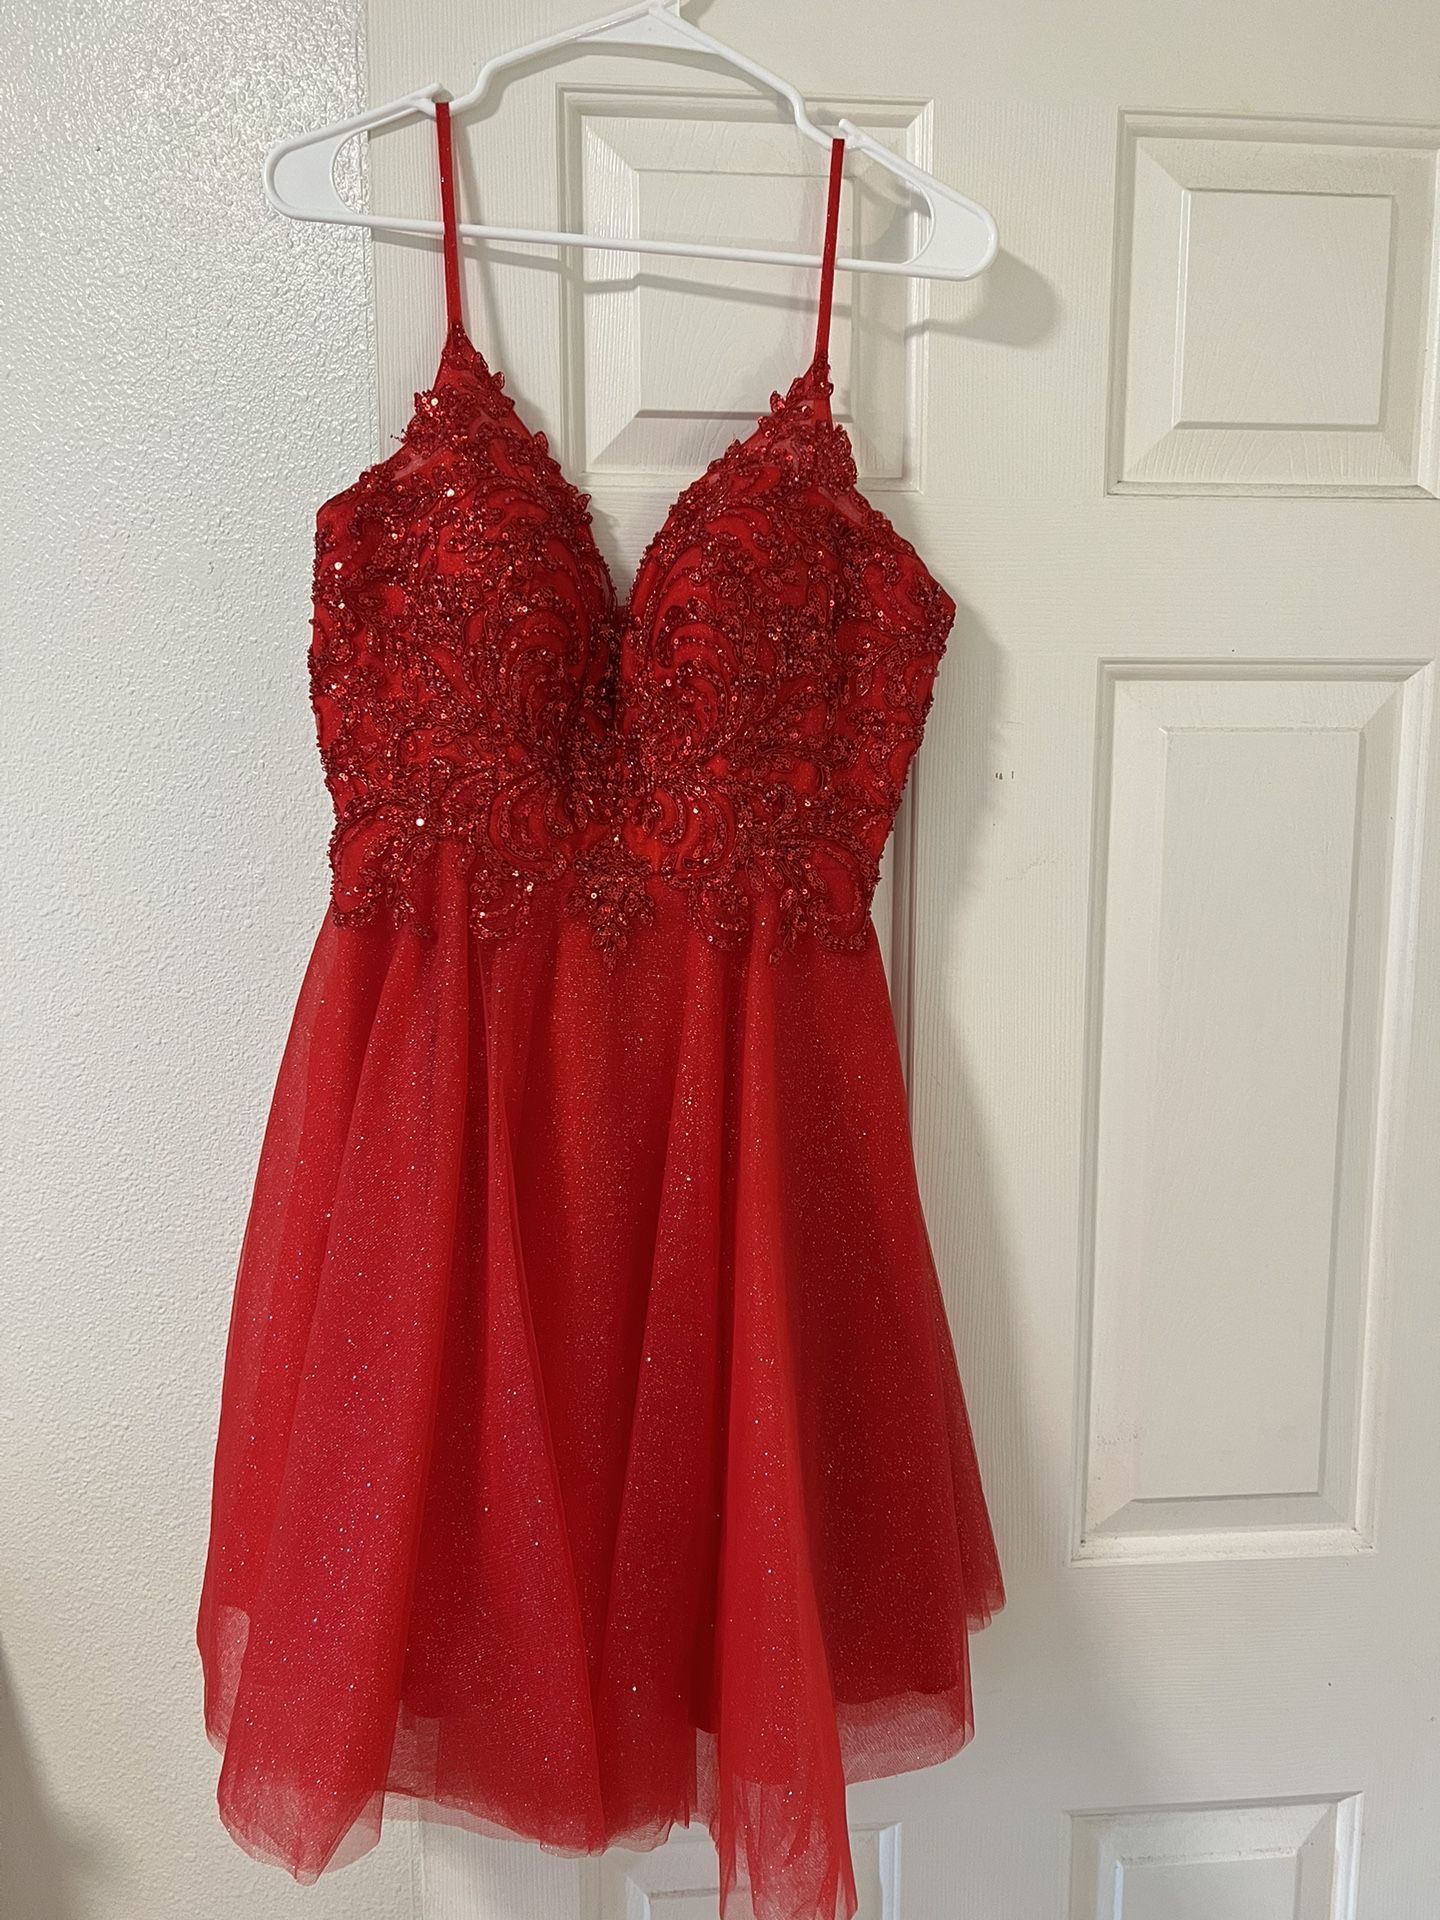 Homecoming/party dress